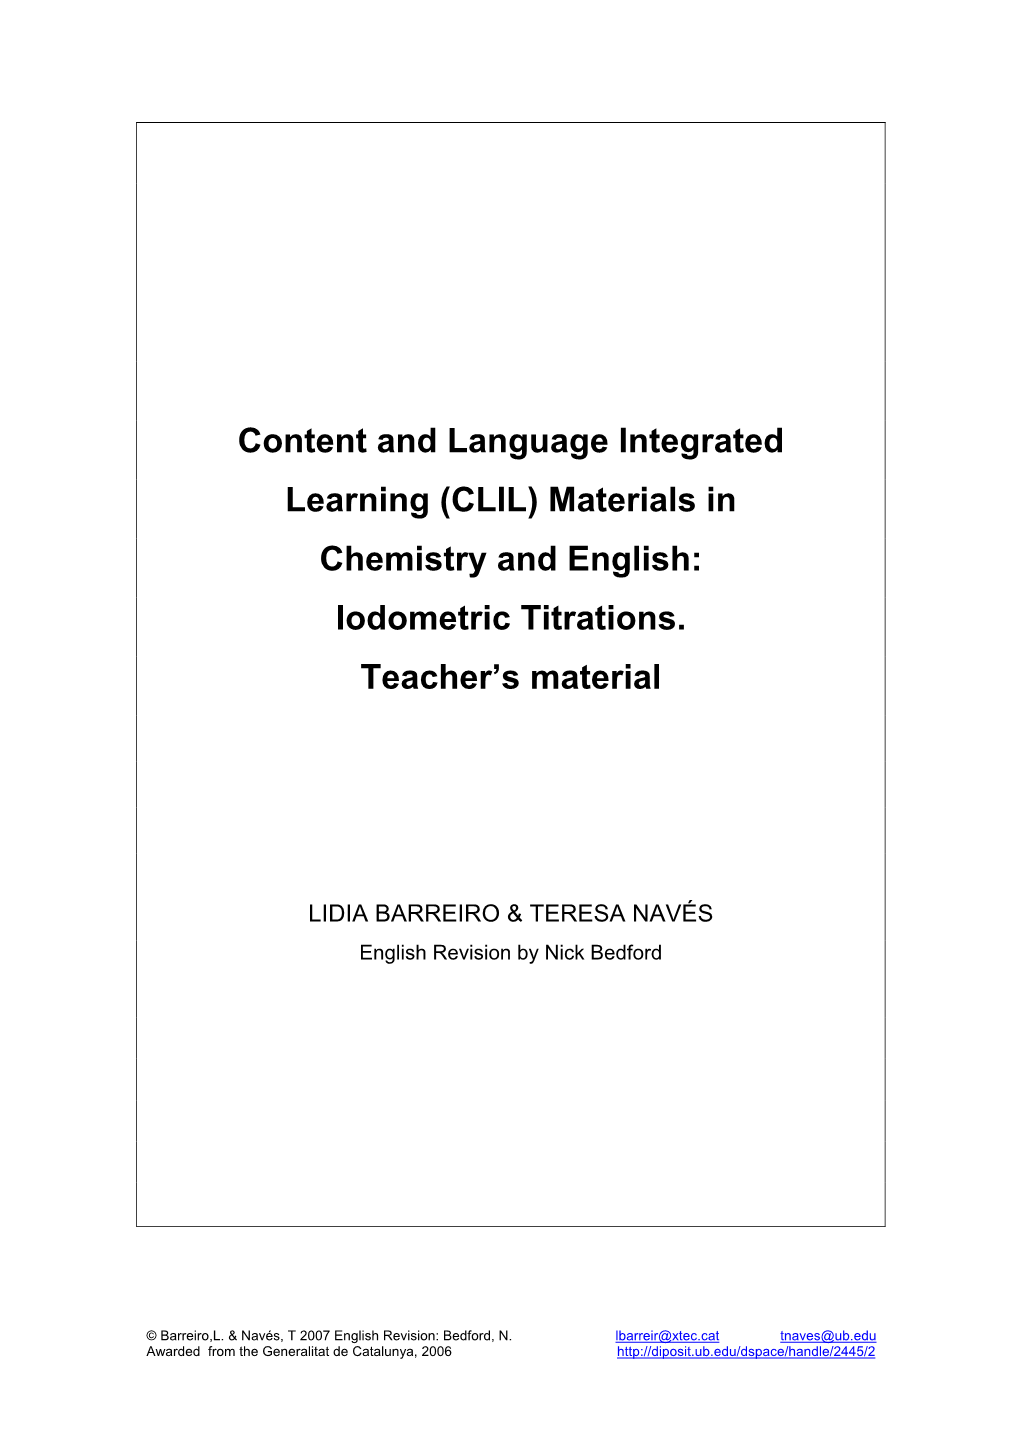 Content and Language Integrated Learning (CLIL) Materials in Chemistry and English: Iodometric Titrations. Teacher's Material